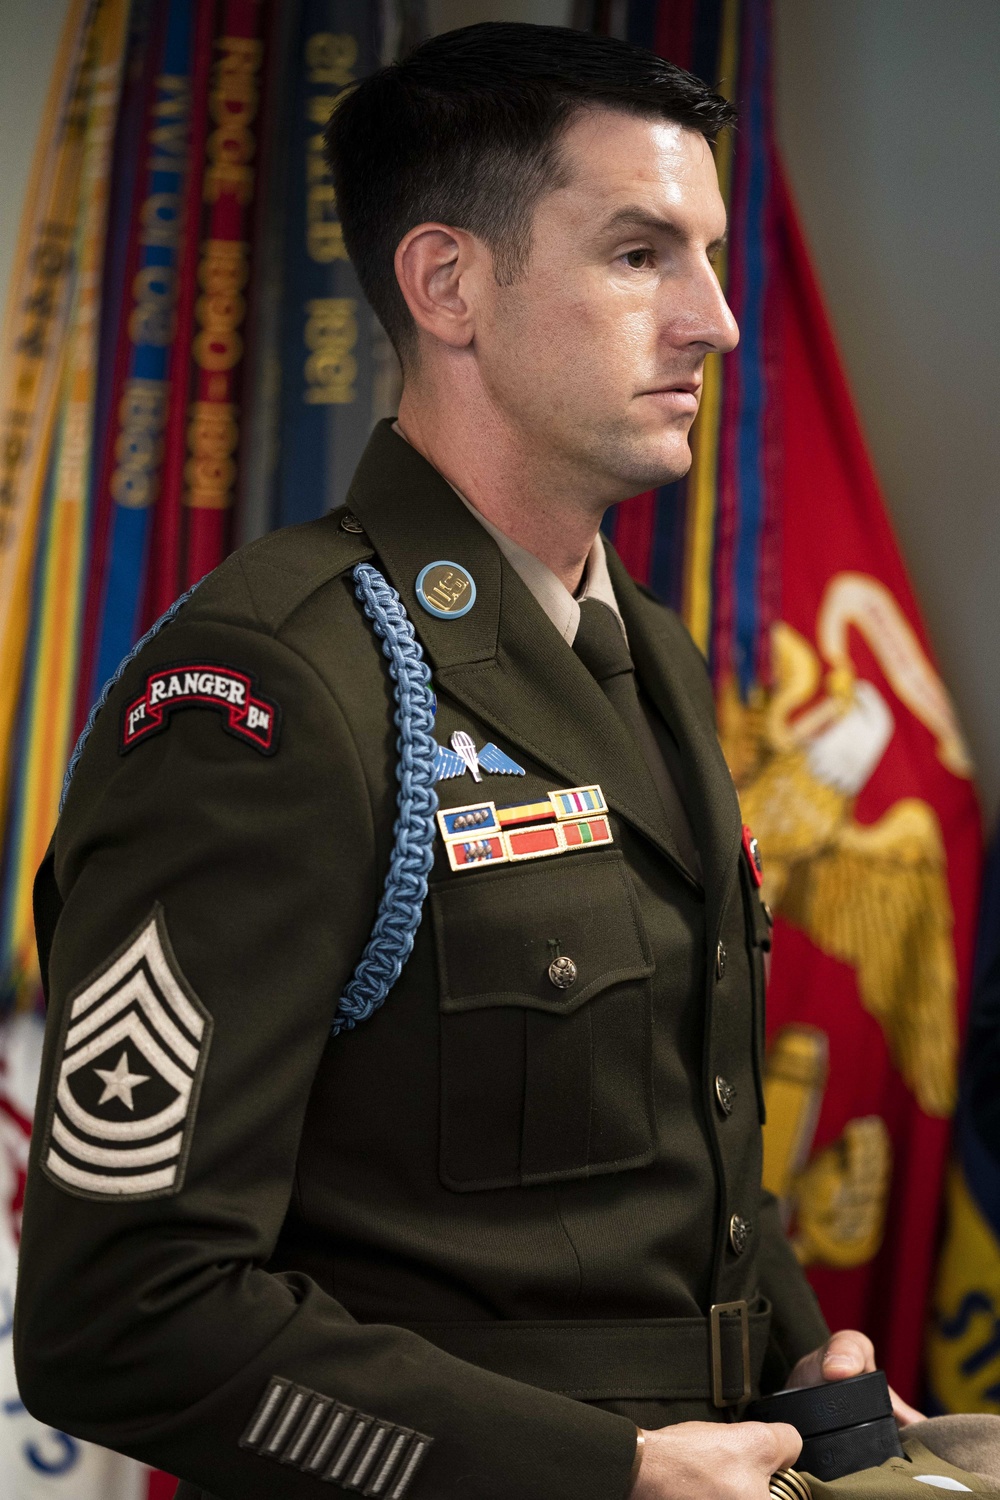 CJCS and SEAC meet with Medal of Honor recipient Army Sgt. Maj. Thomas “Patrick” Payne